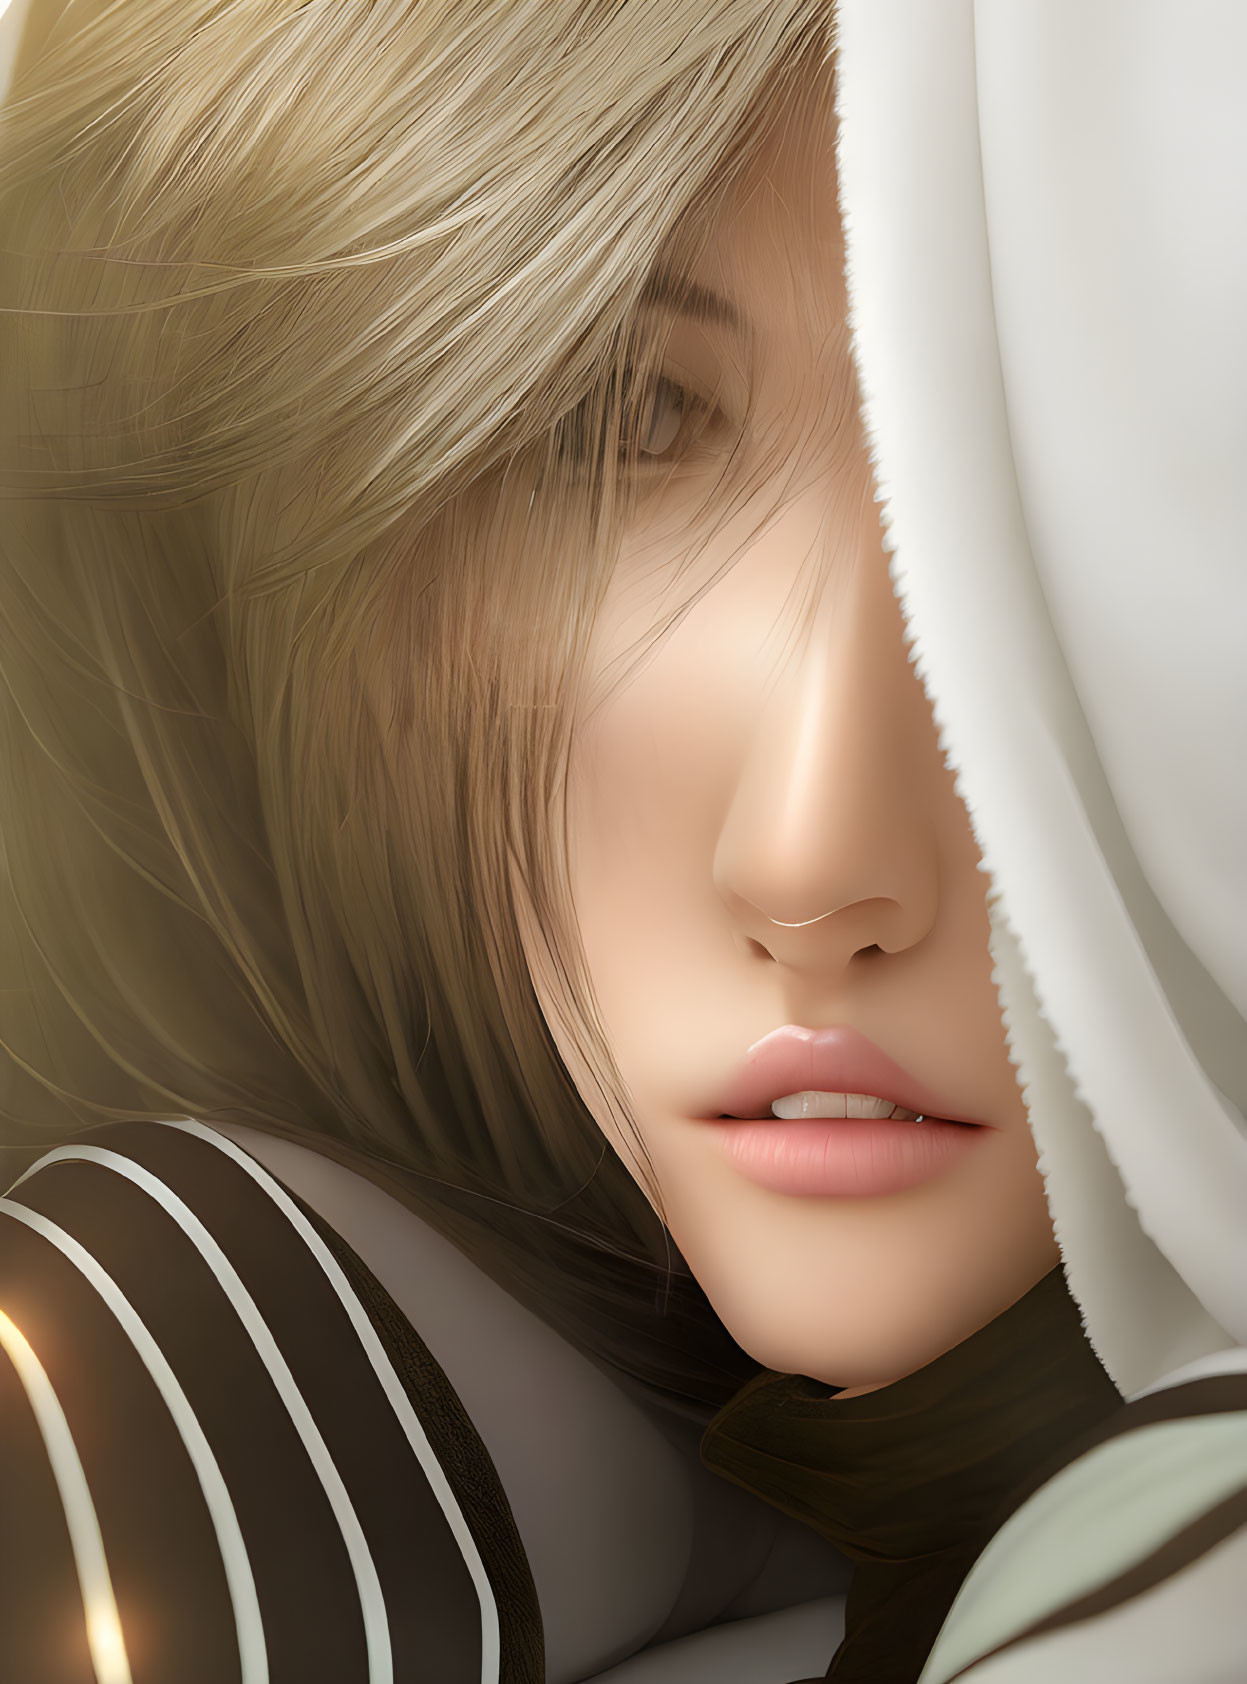 Blonde woman with white cloth in close-up digital art portrait